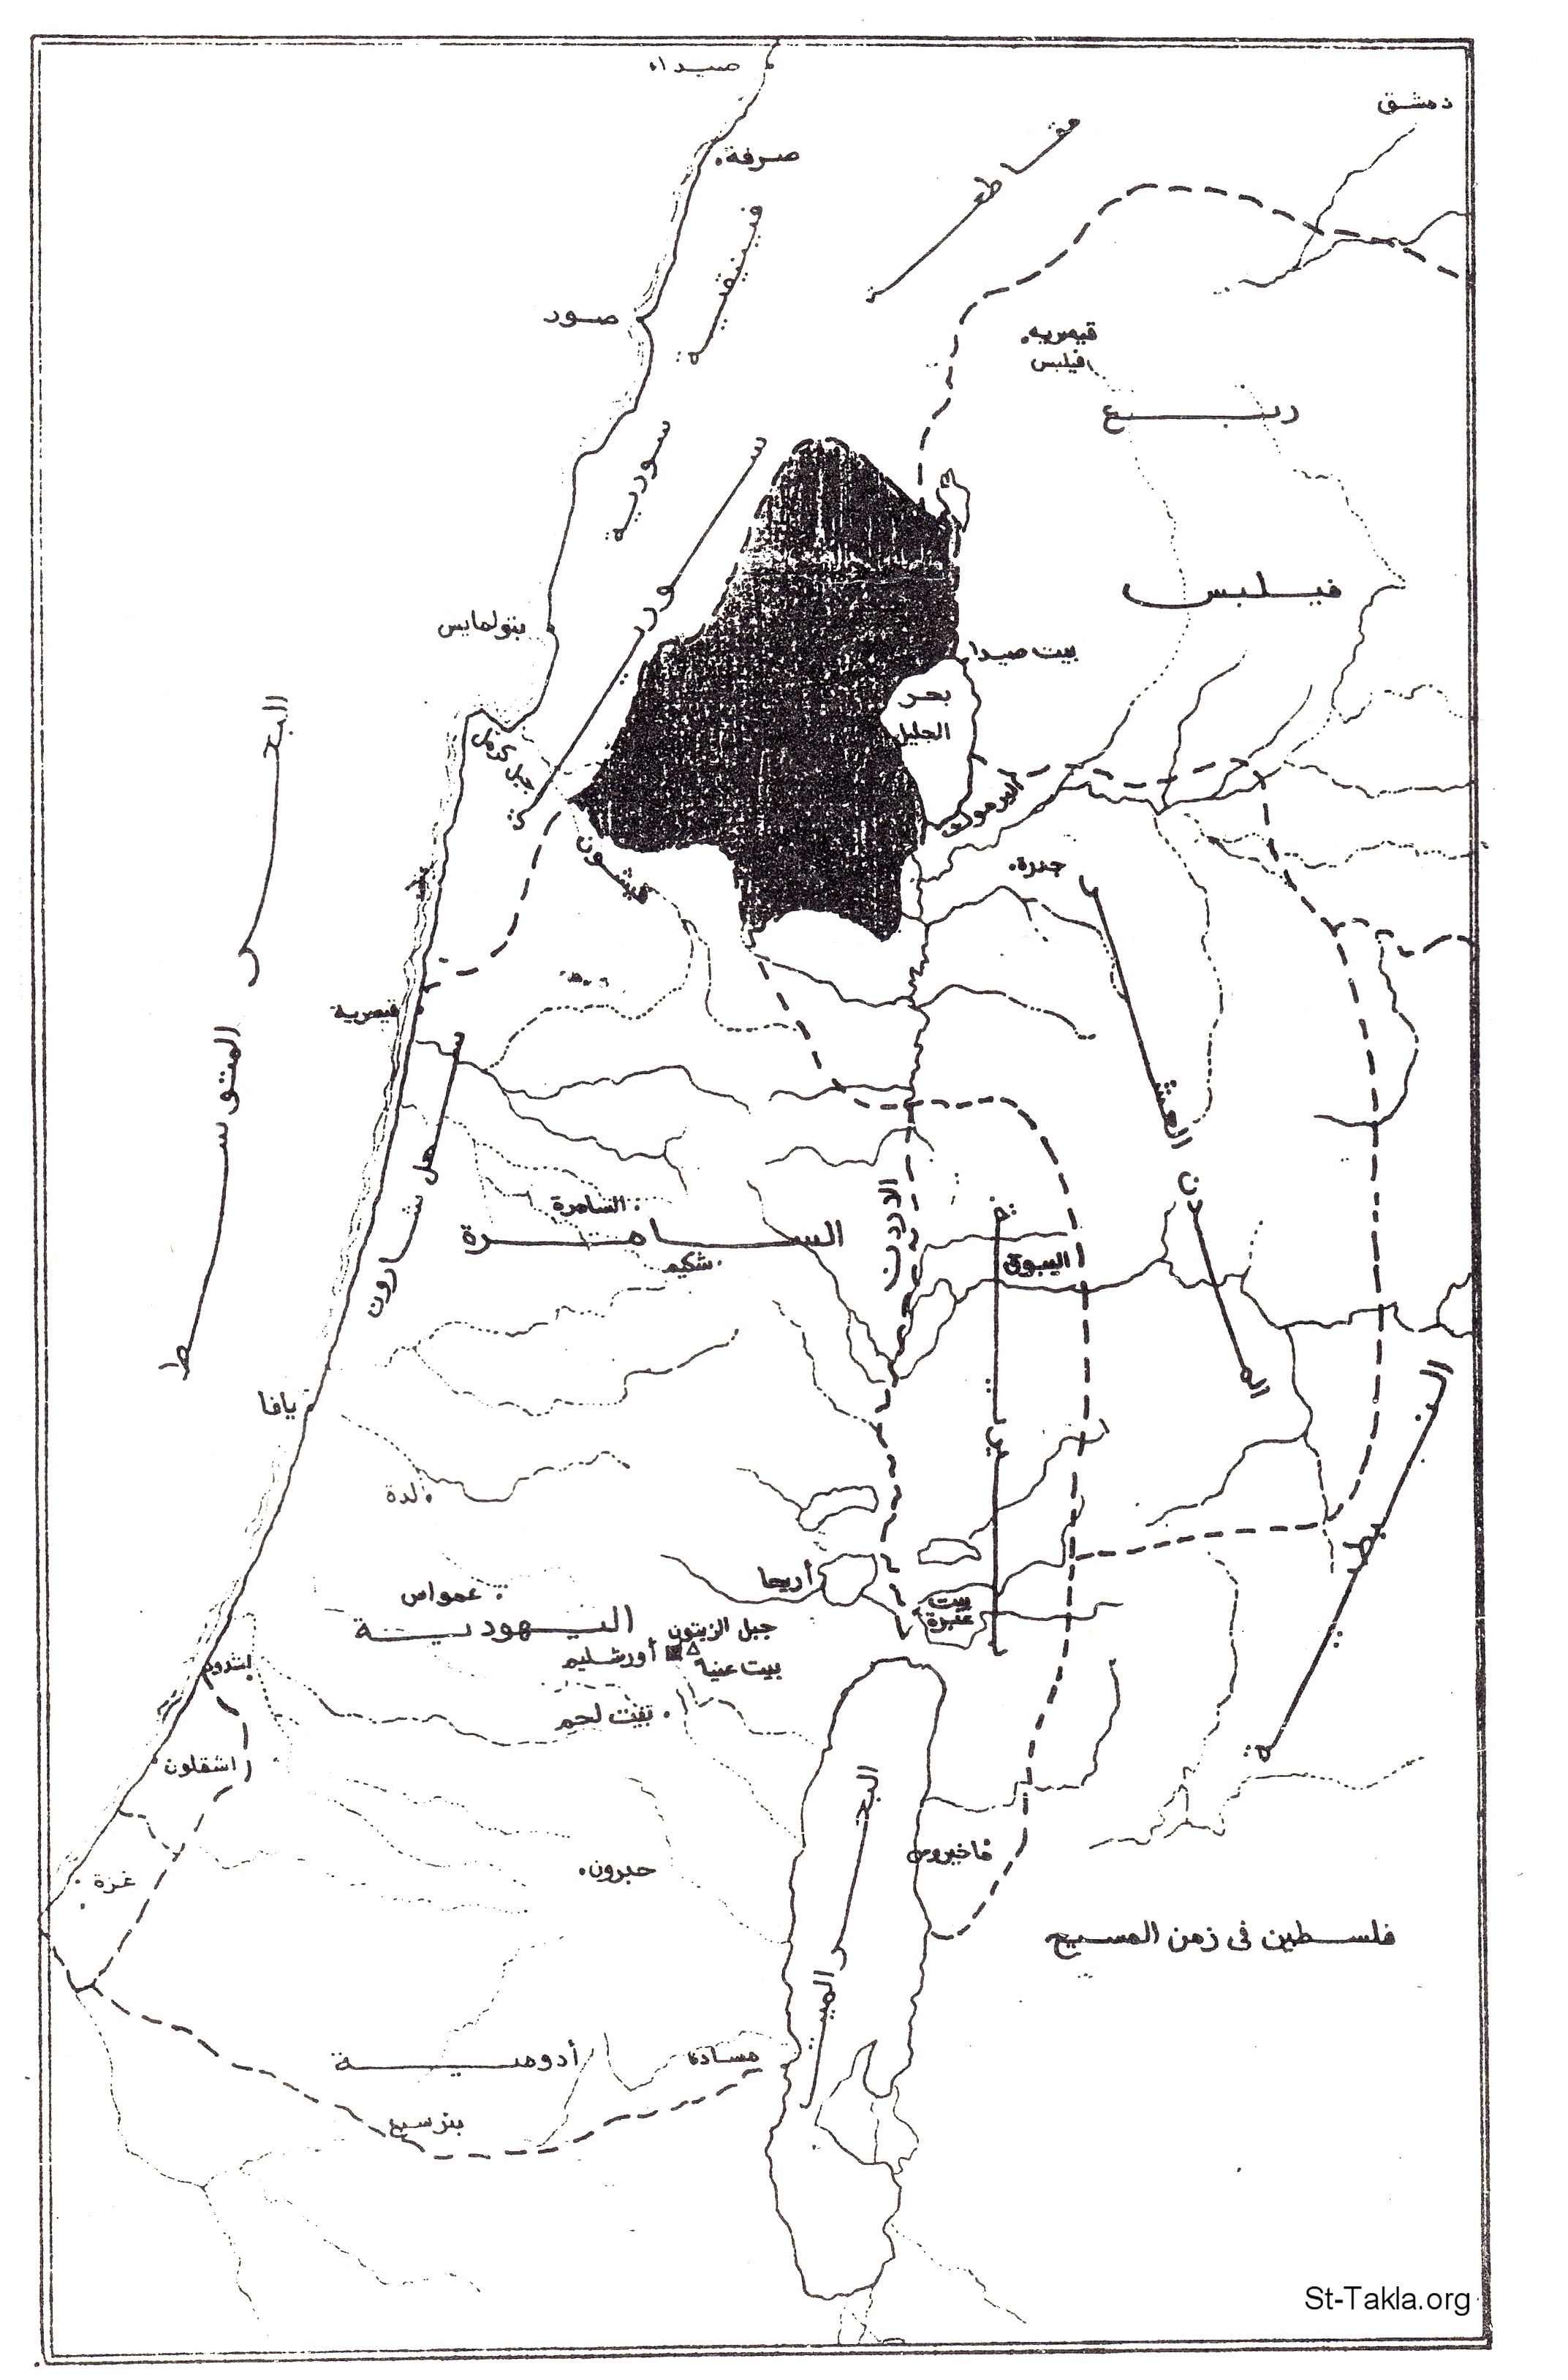 St-Takla.org Image: Map of Palestine at the time of Christ     :     